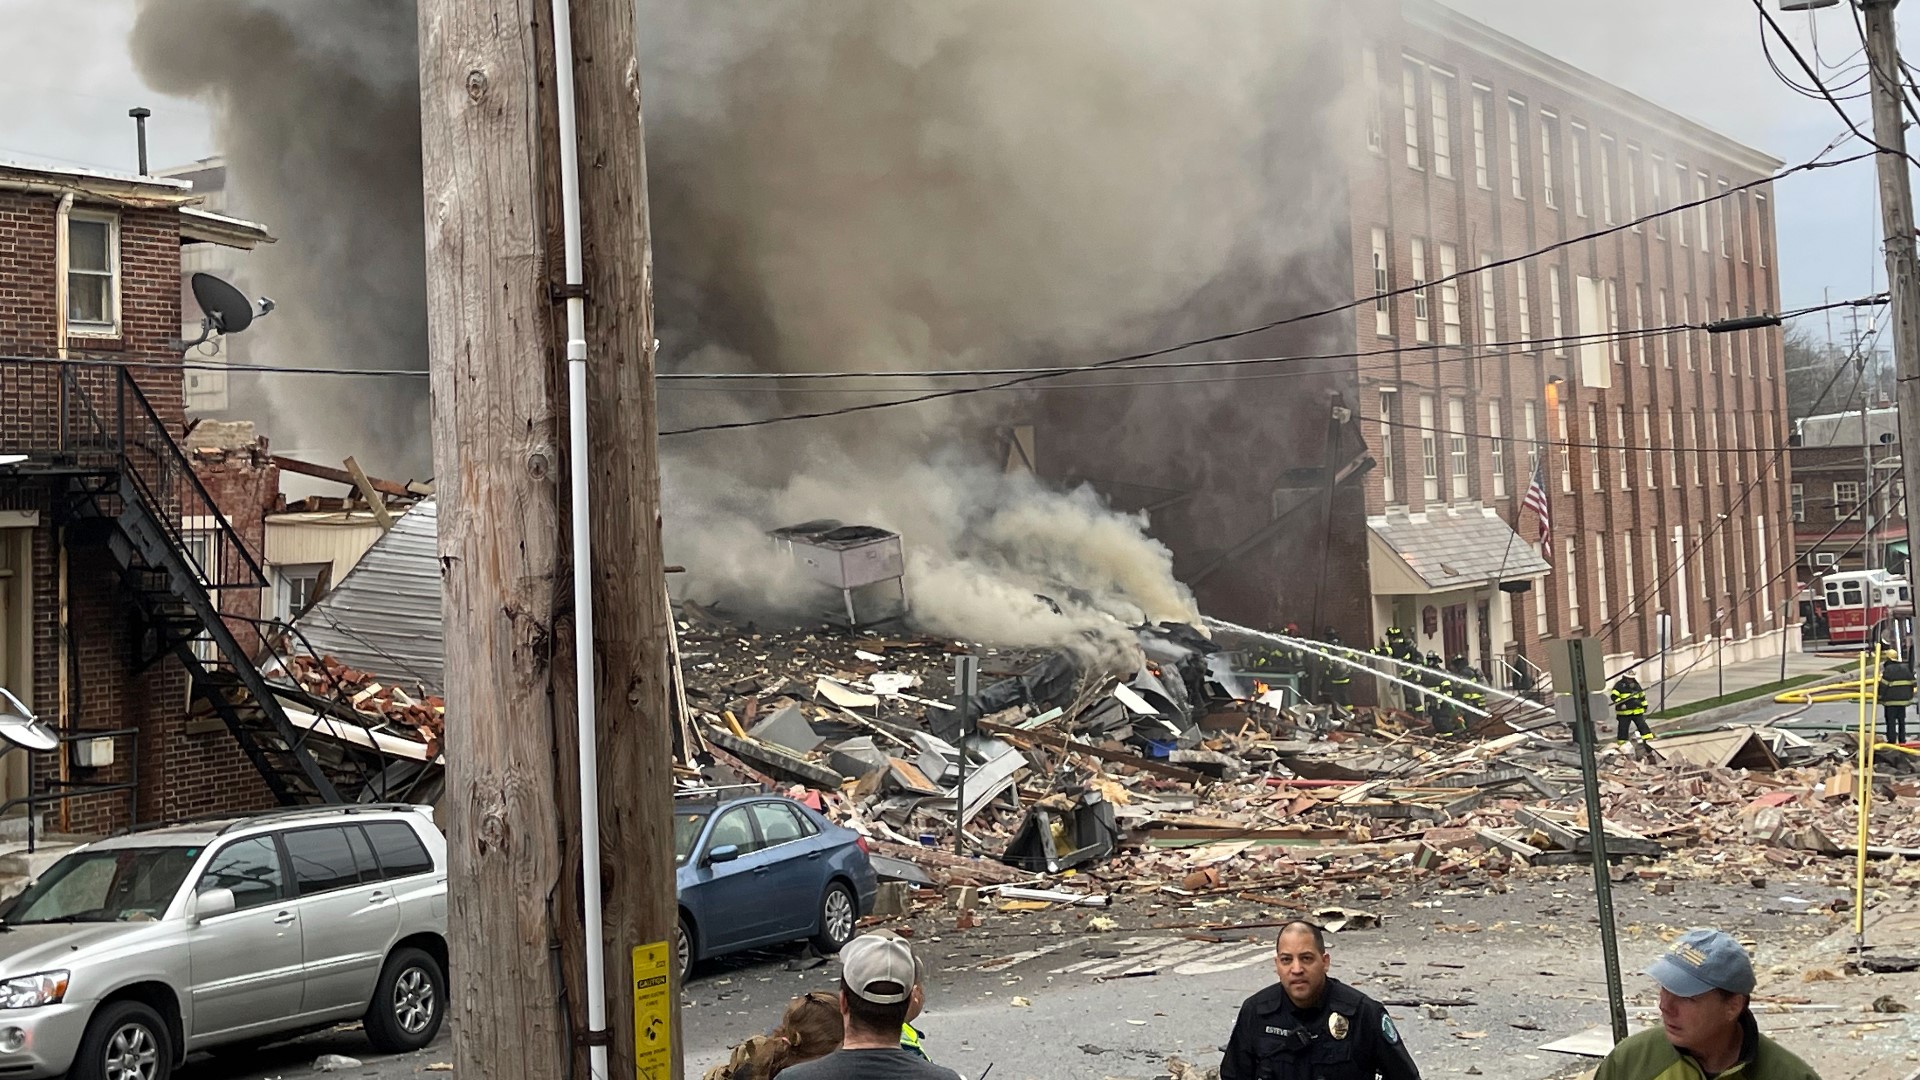 Investigators are still trying to determine what caused the explosion Friday night at a chocolate factory in Pennsylvania.